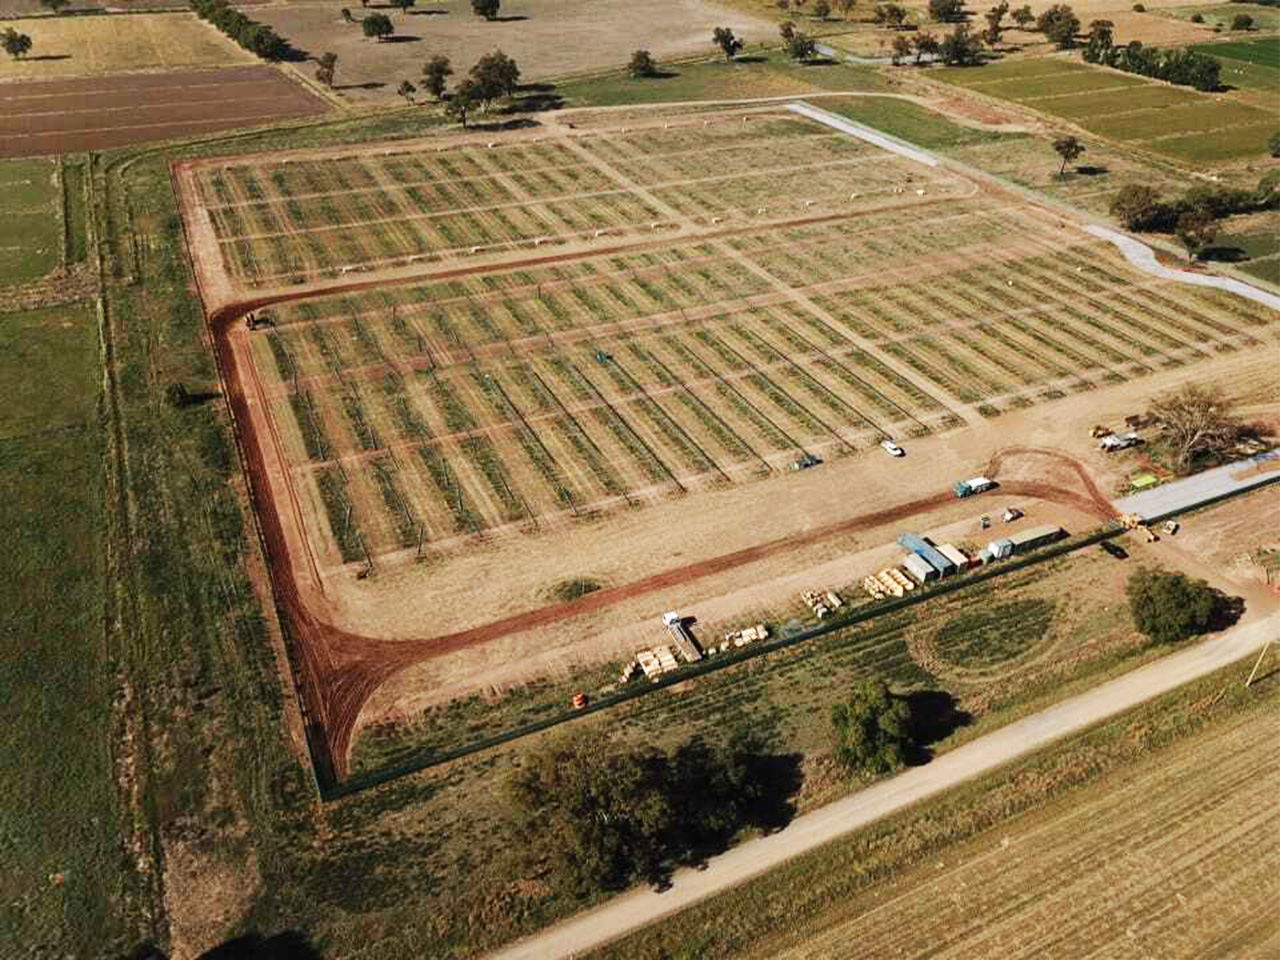 Image 1 of Investment in a solar project located in Numurkah, Victoria, Australia